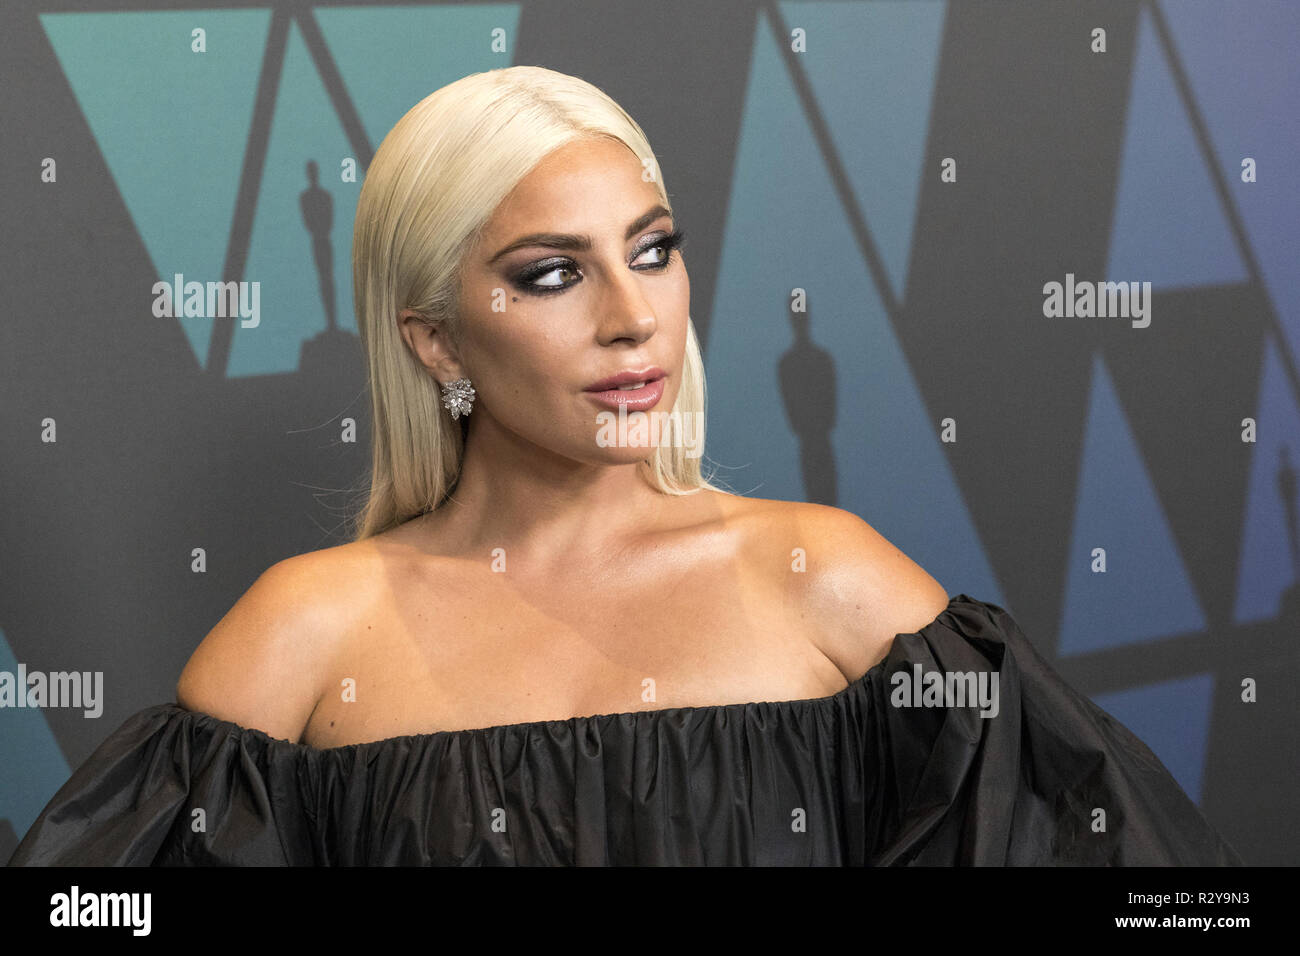 Lady Gaga attends the Academy’s 2018  Annual Governors Awards in The Ray Dolby Ballroom at Hollywood & Highland Center in Hollywood, CA, on Sunday, November 18, 2018. Stock Photo